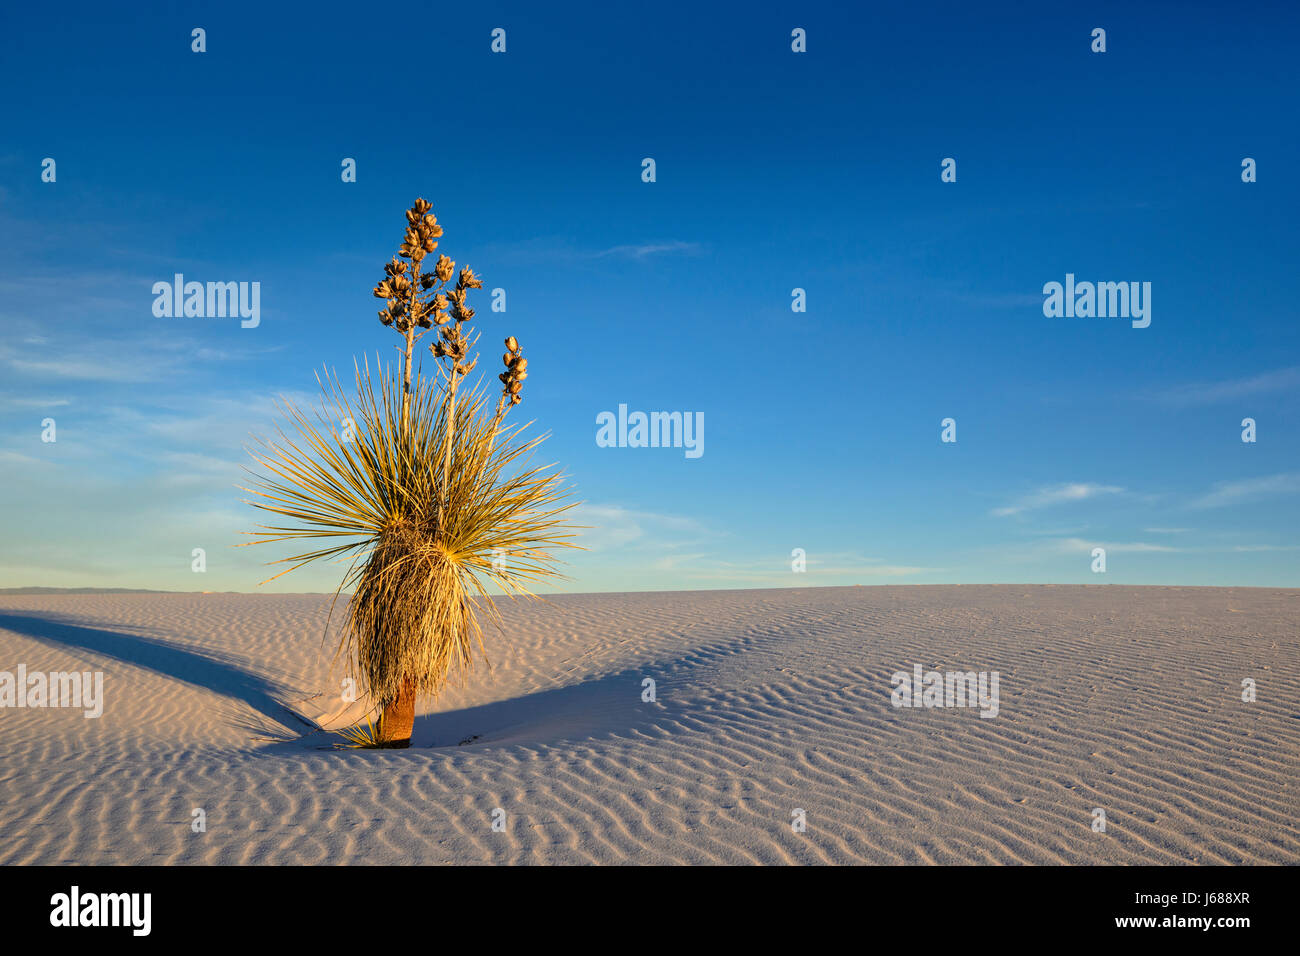 Yucca on sand dune, White Sands National Monument, New Mexico. Stock Photo